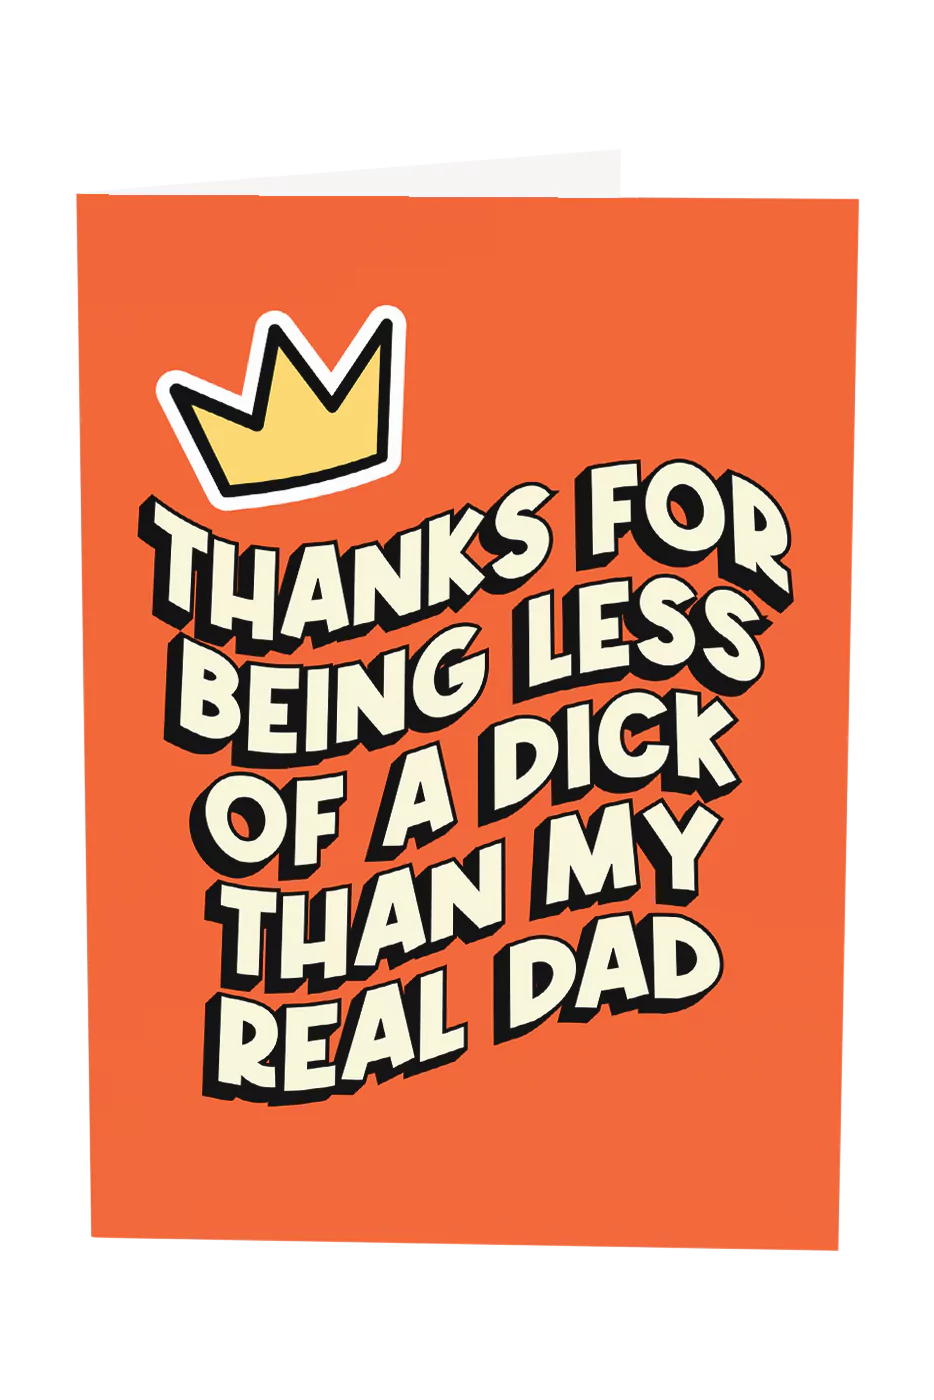 Thanks For Being Less Of A Dick Than My Real Dad